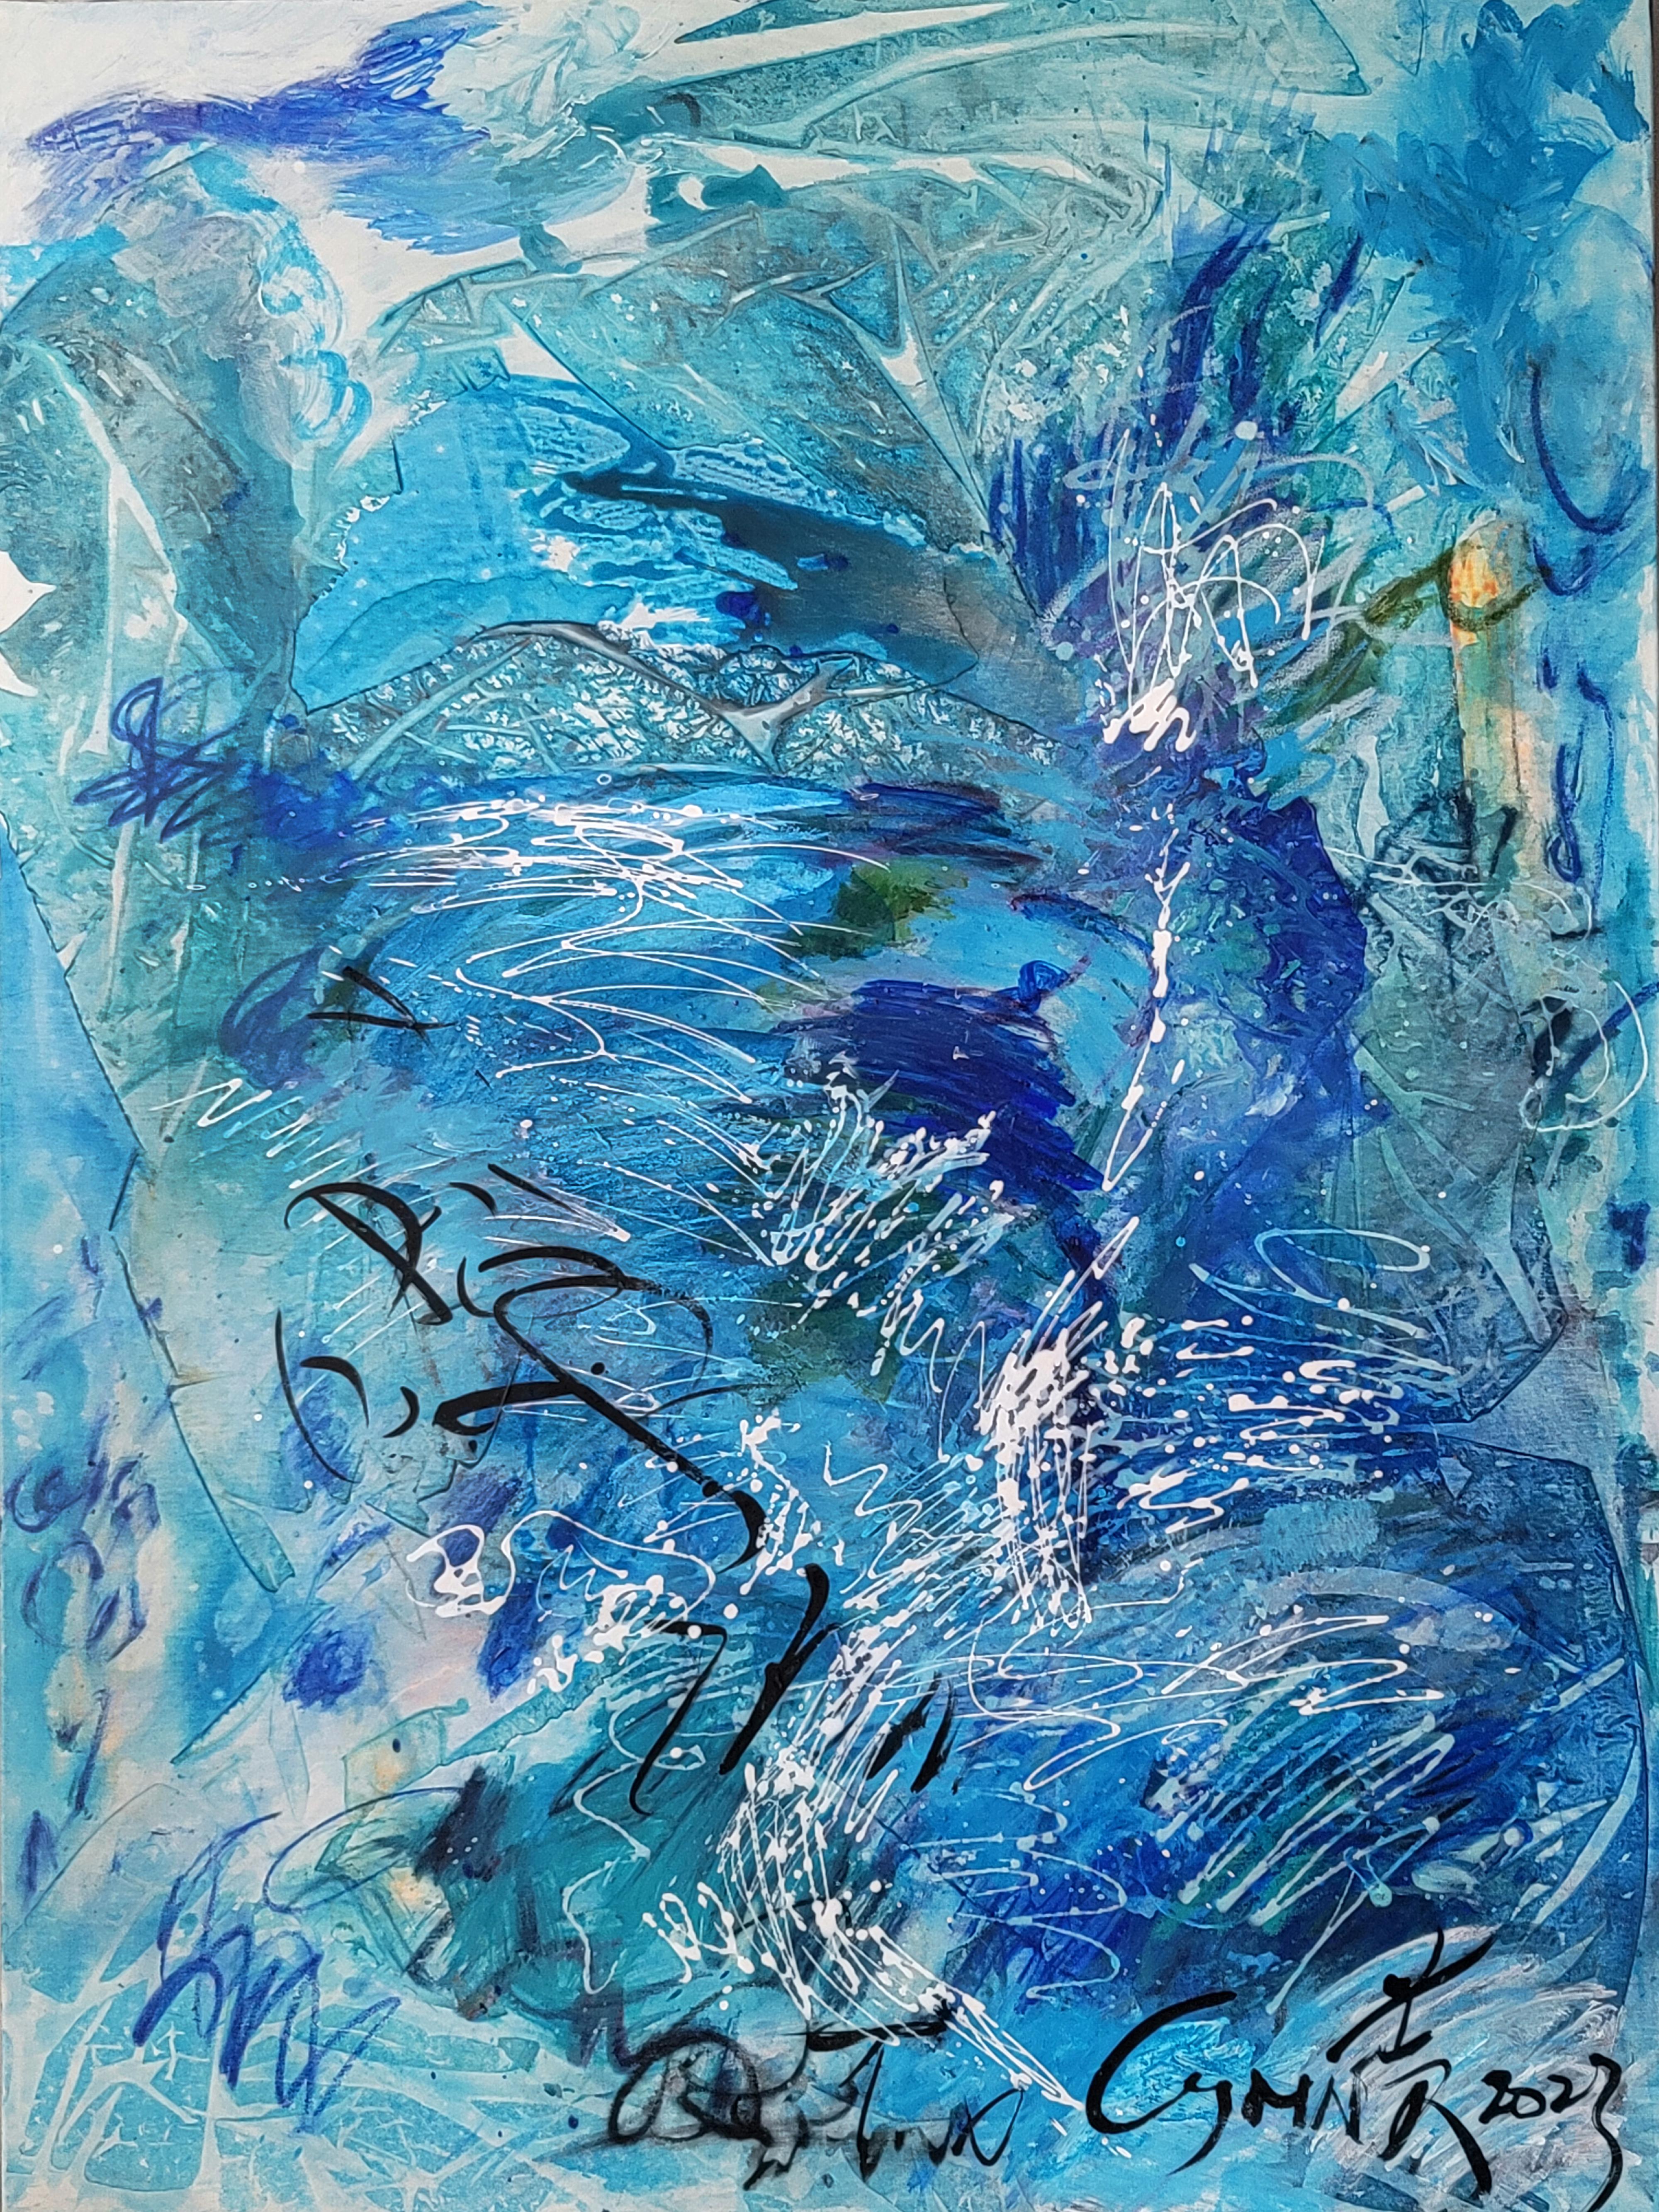 The Journey Within-Expressive, Abstract Landscape, Zen Calligraphy  - Painting by Cymn Wong 